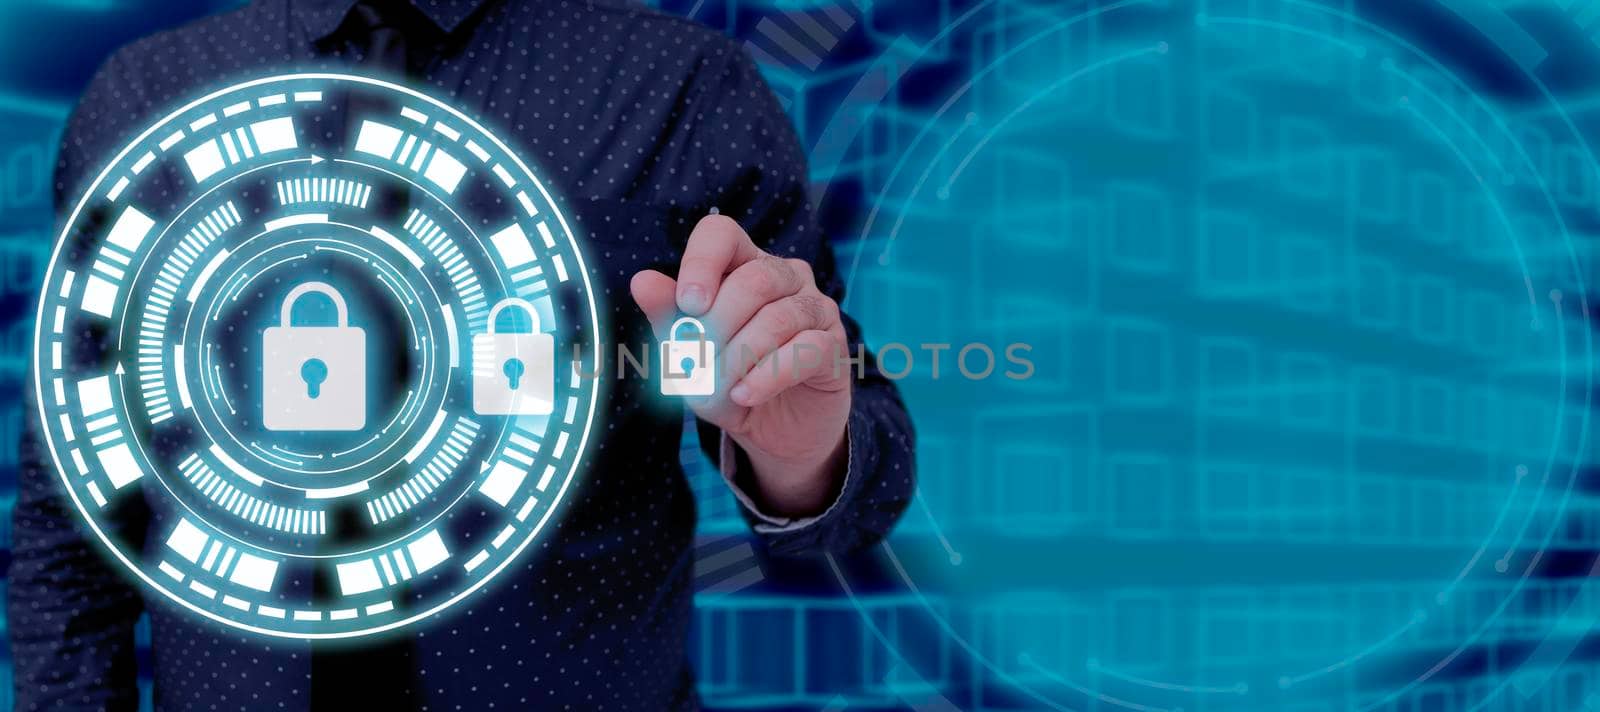 Businessman With A Pen Pointing On Security Presenting Privacy In Information In A Futuristic Frame. Man With A Pen Showing The Lock Symbol For Protecting Crucial Data. by nialowwa